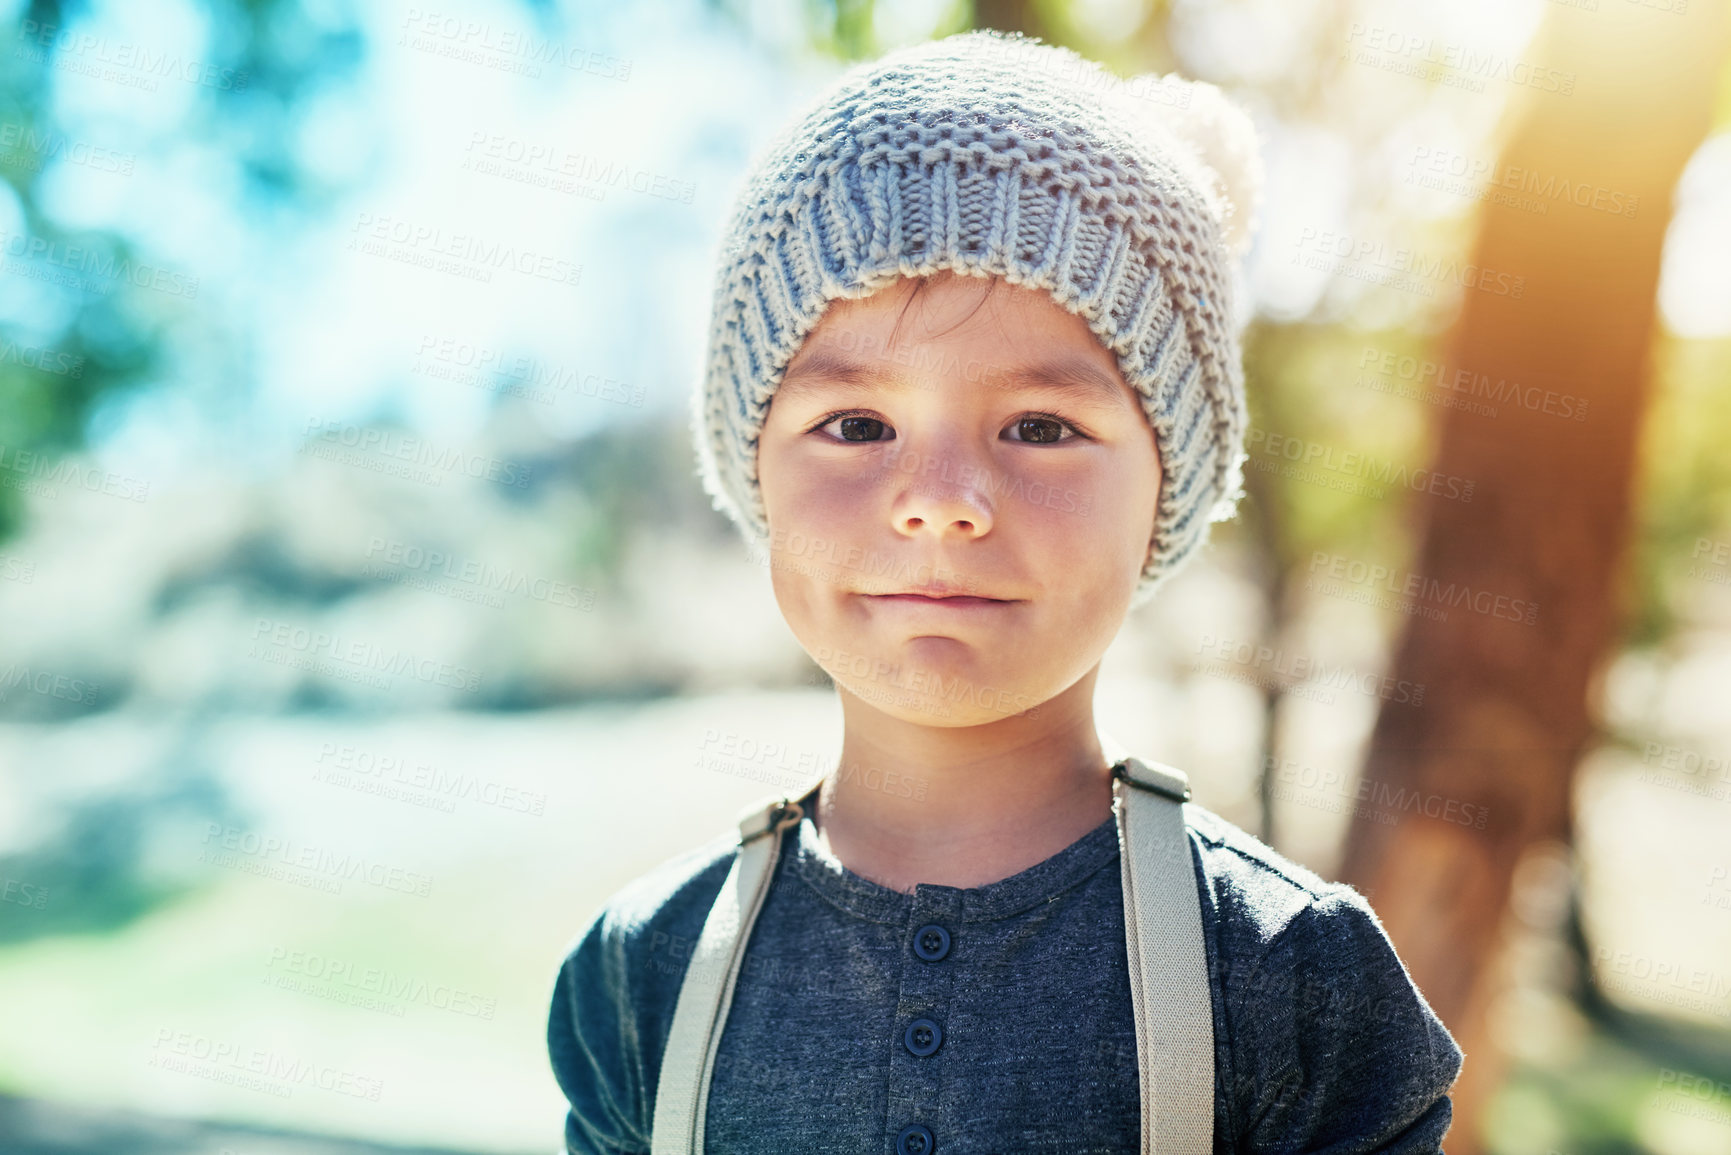 Buy stock photo Portrait of an adorable little boy playing outside